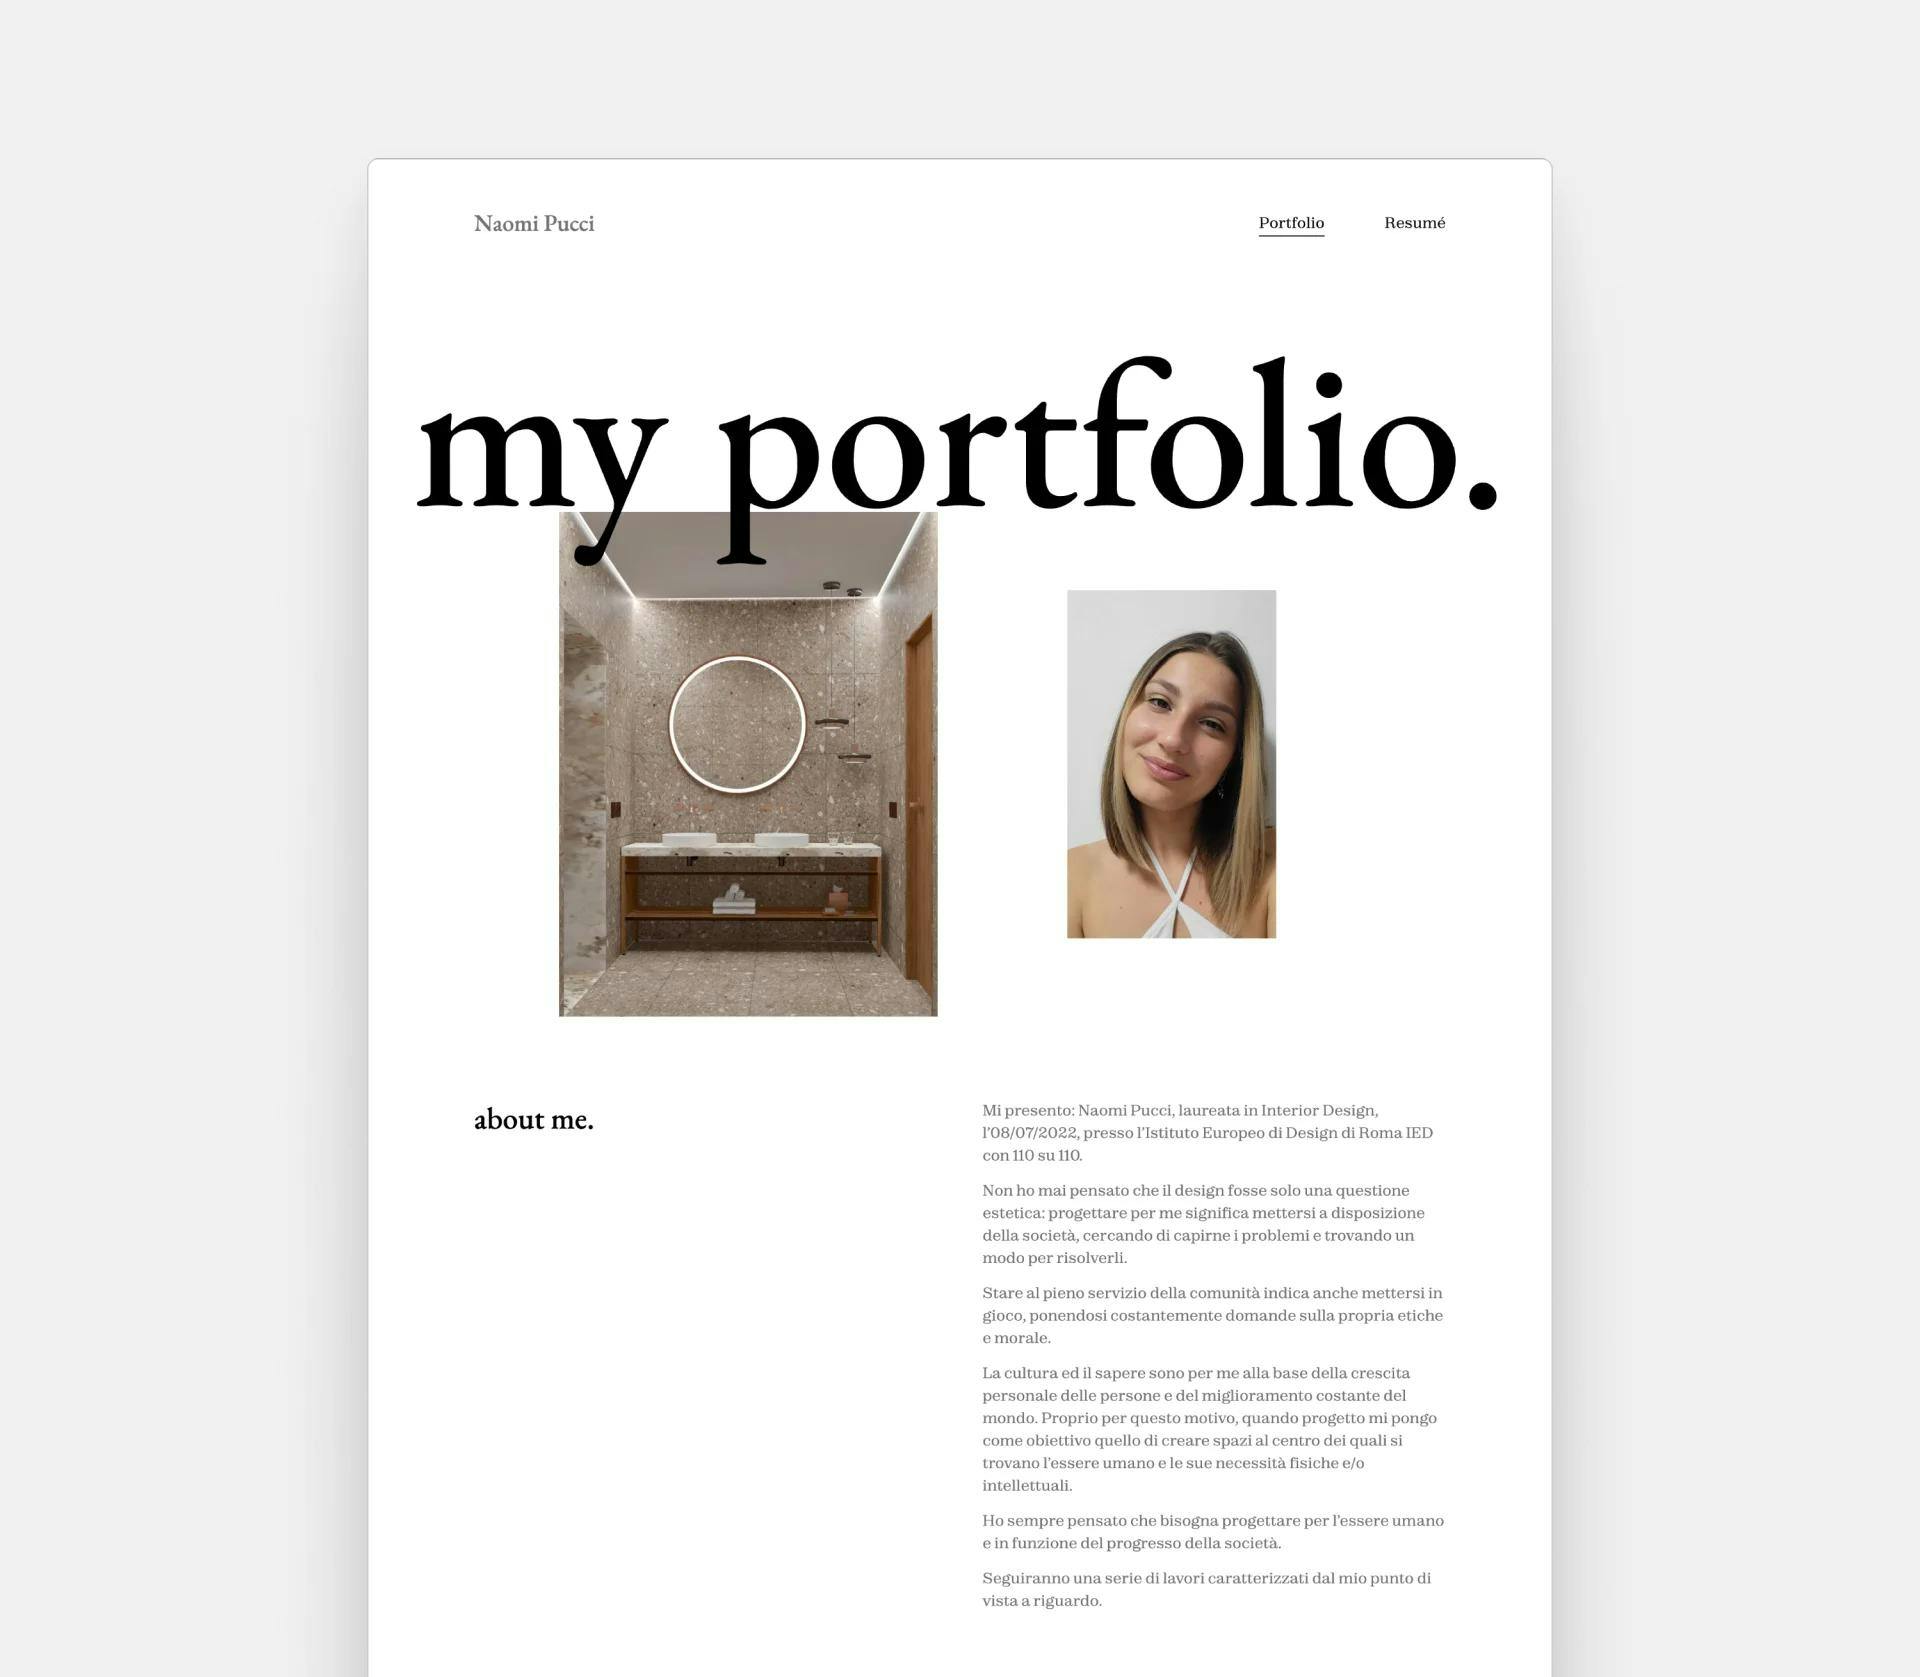 Screenshot of Naomi Pucci's interior website, featuring a render and her profile picture right at the top